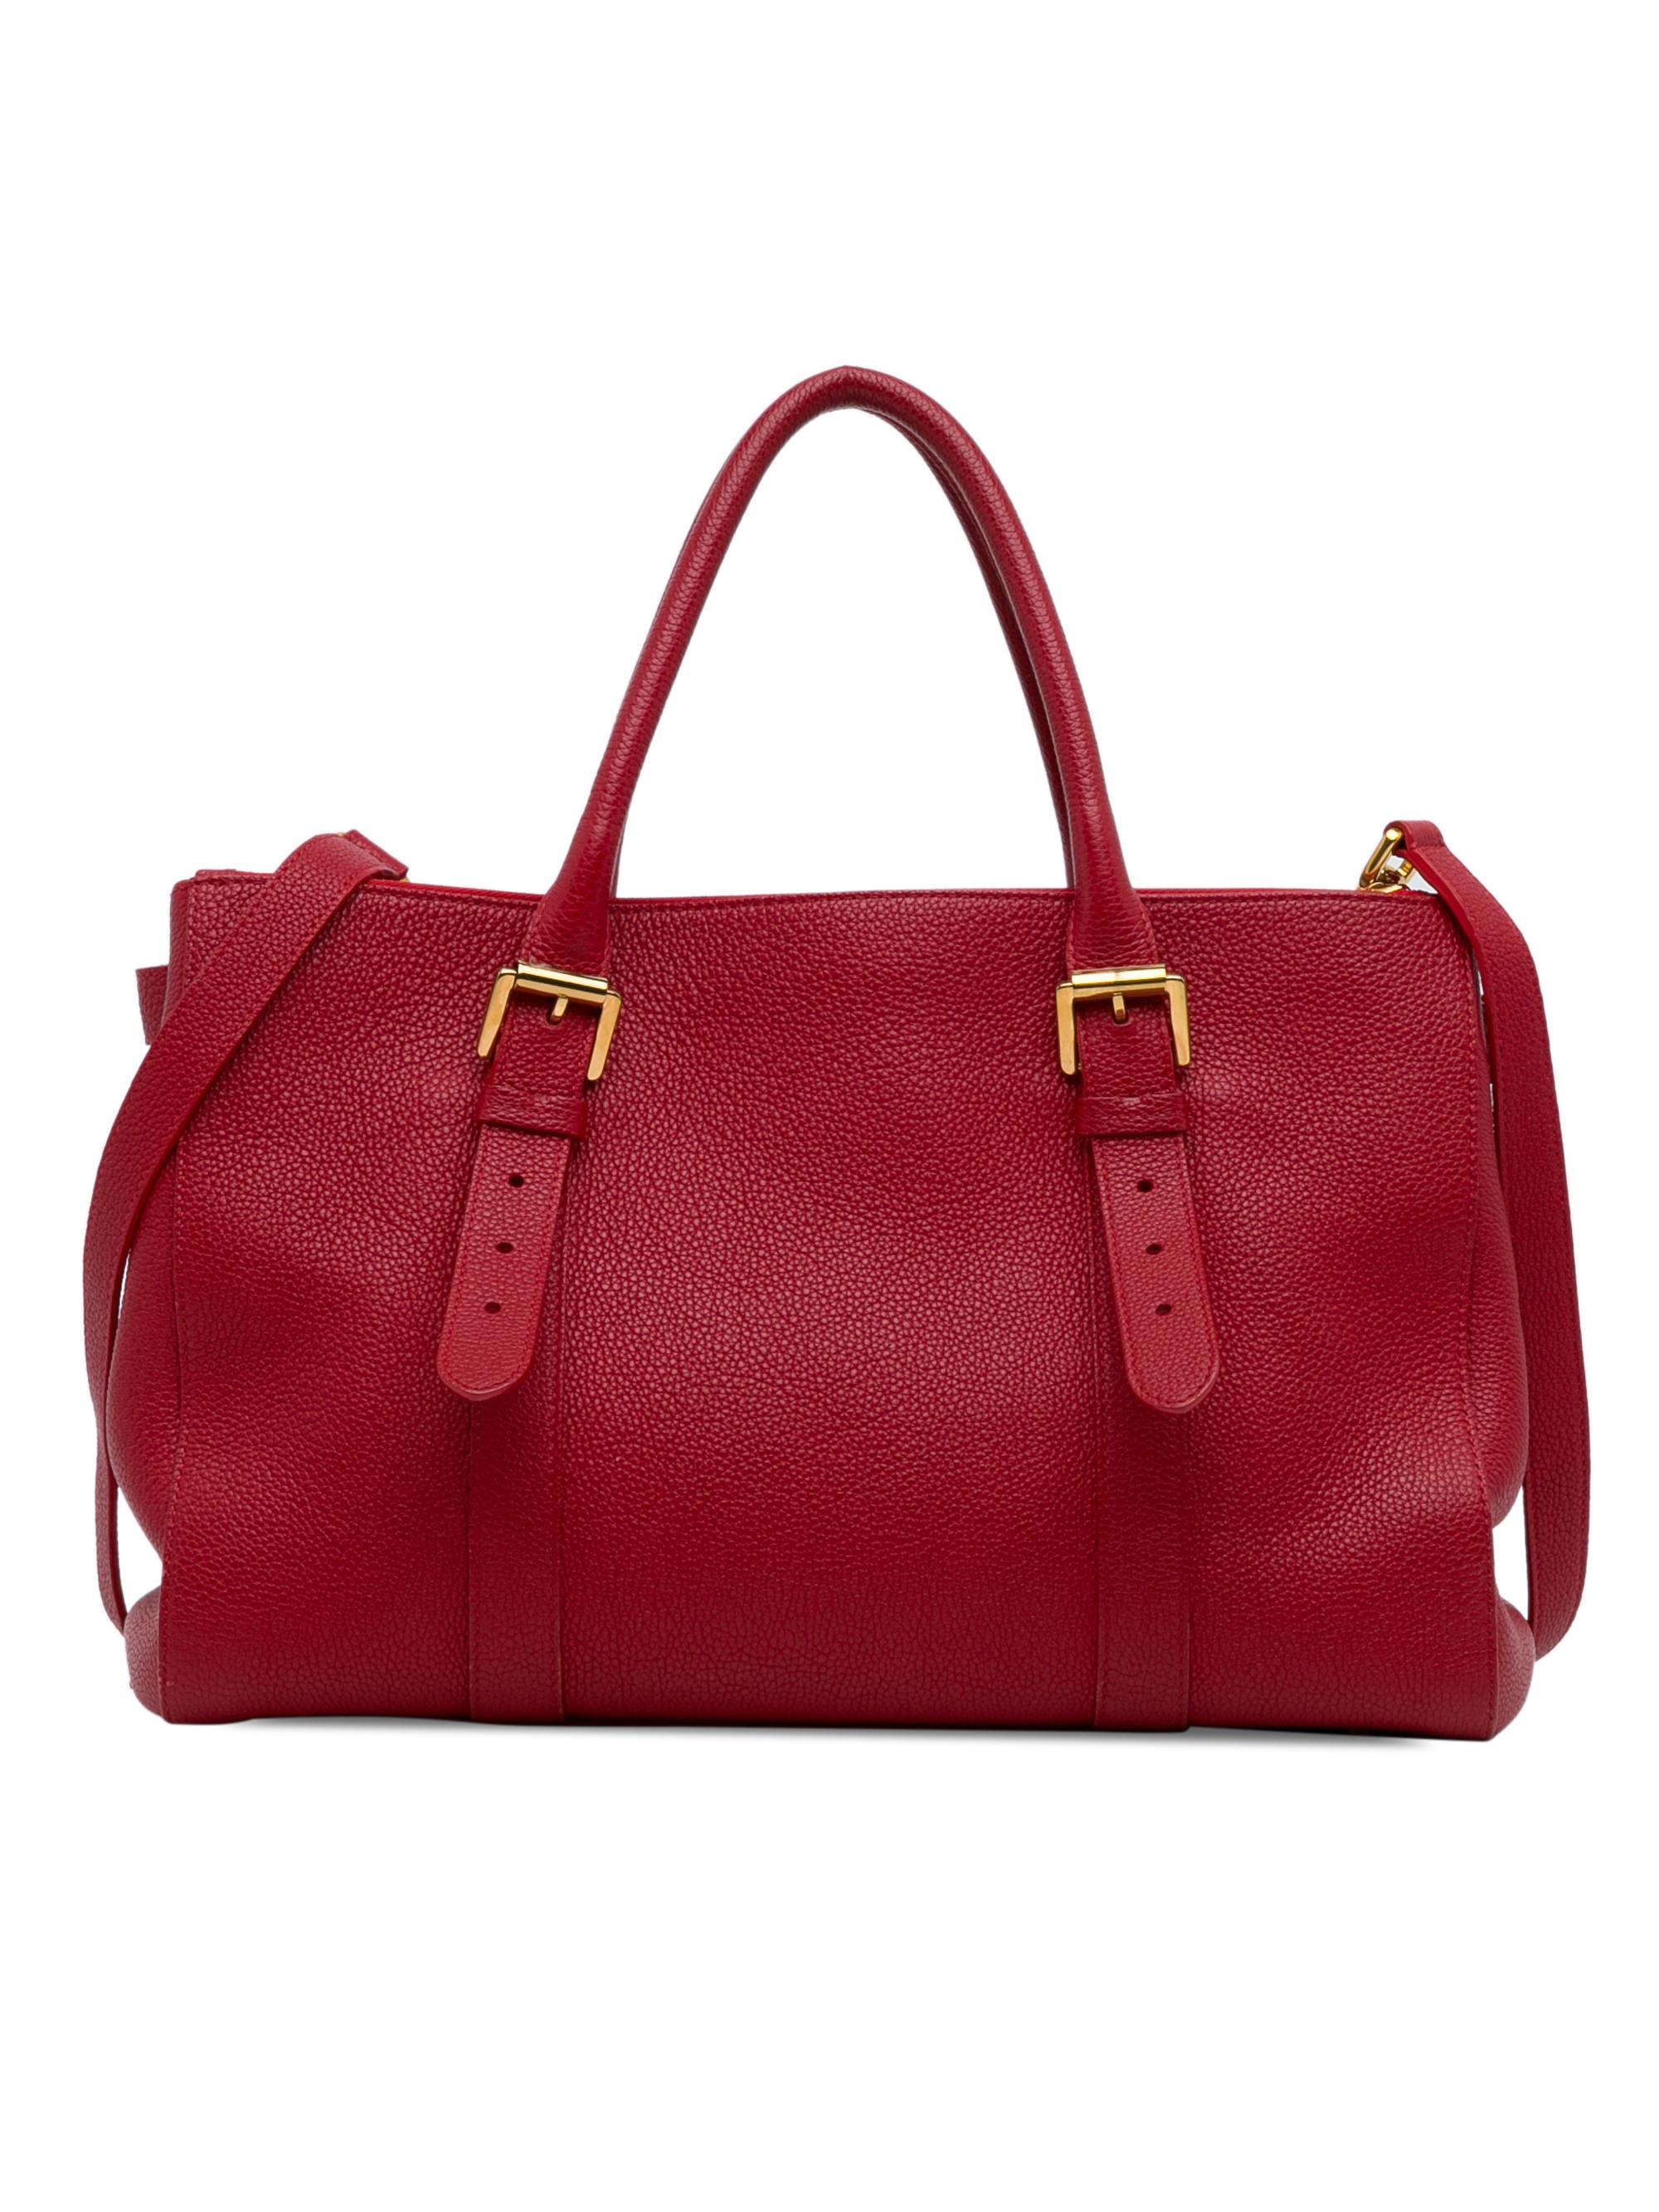 Mulberry Handbags On Sale Up To 90% Off Retail